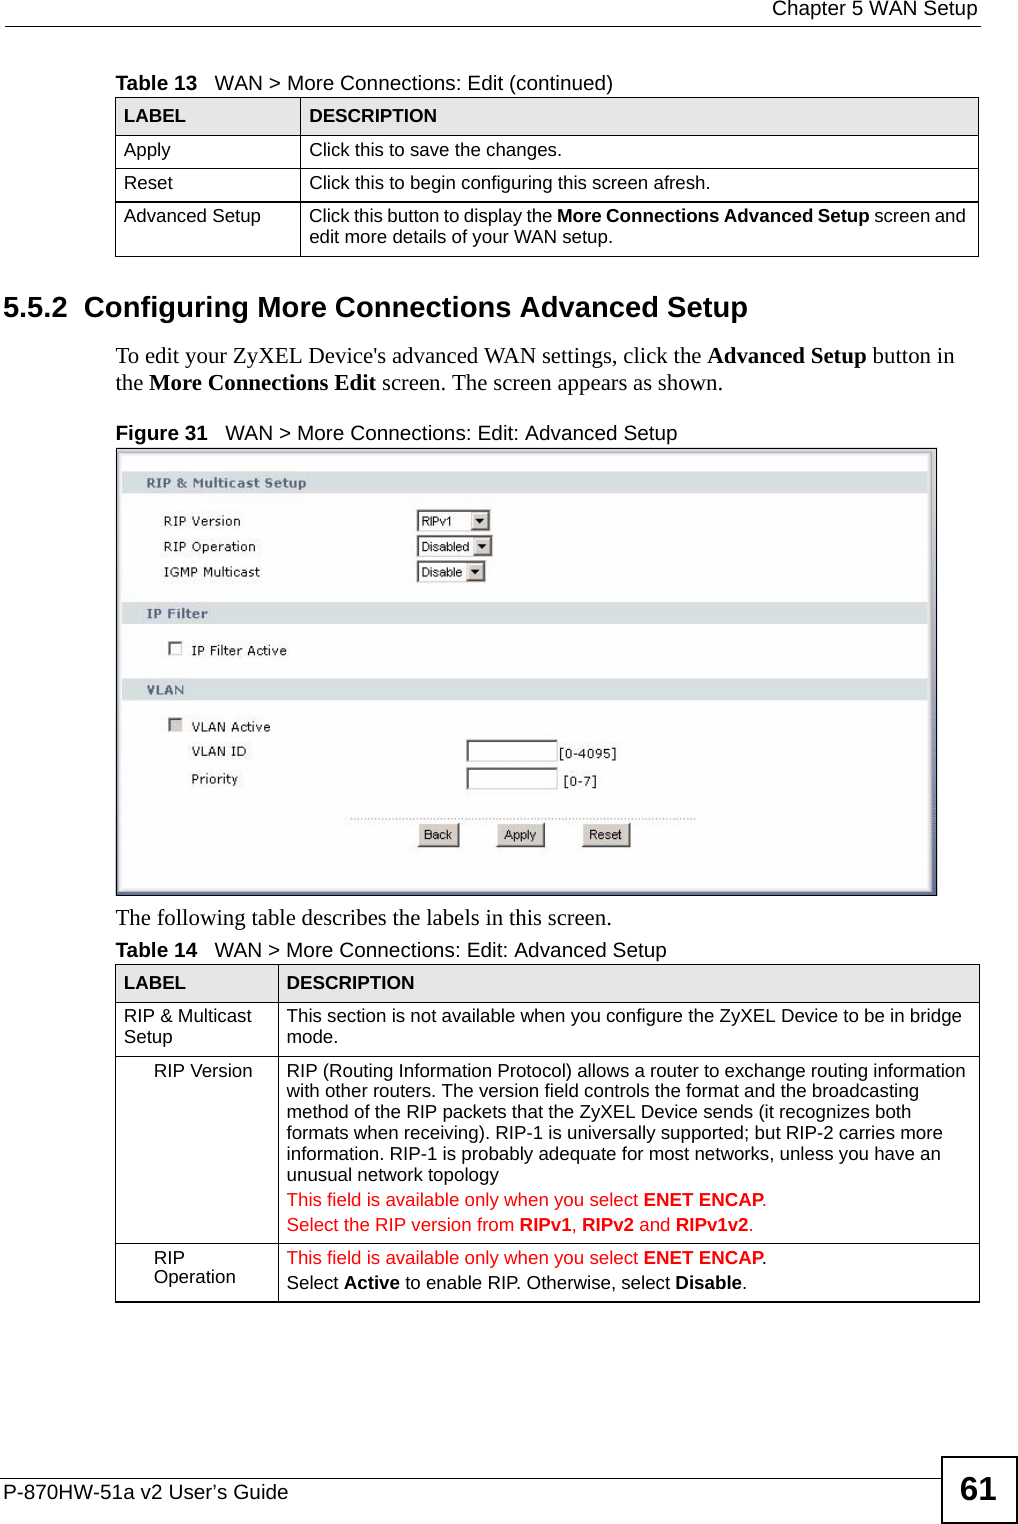  Chapter 5 WAN SetupP-870HW-51a v2 User’s Guide 615.5.2  Configuring More Connections Advanced Setup To edit your ZyXEL Device&apos;s advanced WAN settings, click the Advanced Setup button in the More Connections Edit screen. The screen appears as shown.Figure 31   WAN &gt; More Connections: Edit: Advanced SetupThe following table describes the labels in this screen. Apply Click this to save the changes. Reset Click this to begin configuring this screen afresh.Advanced Setup Click this button to display the More Connections Advanced Setup screen and edit more details of your WAN setup.Table 13   WAN &gt; More Connections: Edit (continued)LABEL DESCRIPTIONTable 14   WAN &gt; More Connections: Edit: Advanced SetupLABEL DESCRIPTIONRIP &amp; Multicast Setup This section is not available when you configure the ZyXEL Device to be in bridge mode.RIP Version RIP (Routing Information Protocol) allows a router to exchange routing information with other routers. The version field controls the format and the broadcasting method of the RIP packets that the ZyXEL Device sends (it recognizes both formats when receiving). RIP-1 is universally supported; but RIP-2 carries more information. RIP-1 is probably adequate for most networks, unless you have an unusual network topologyThis field is available only when you select ENET ENCAP.Select the RIP version from RIPv1, RIPv2 and RIPv1v2.RIP Operation This field is available only when you select ENET ENCAP.Select Active to enable RIP. Otherwise, select Disable.